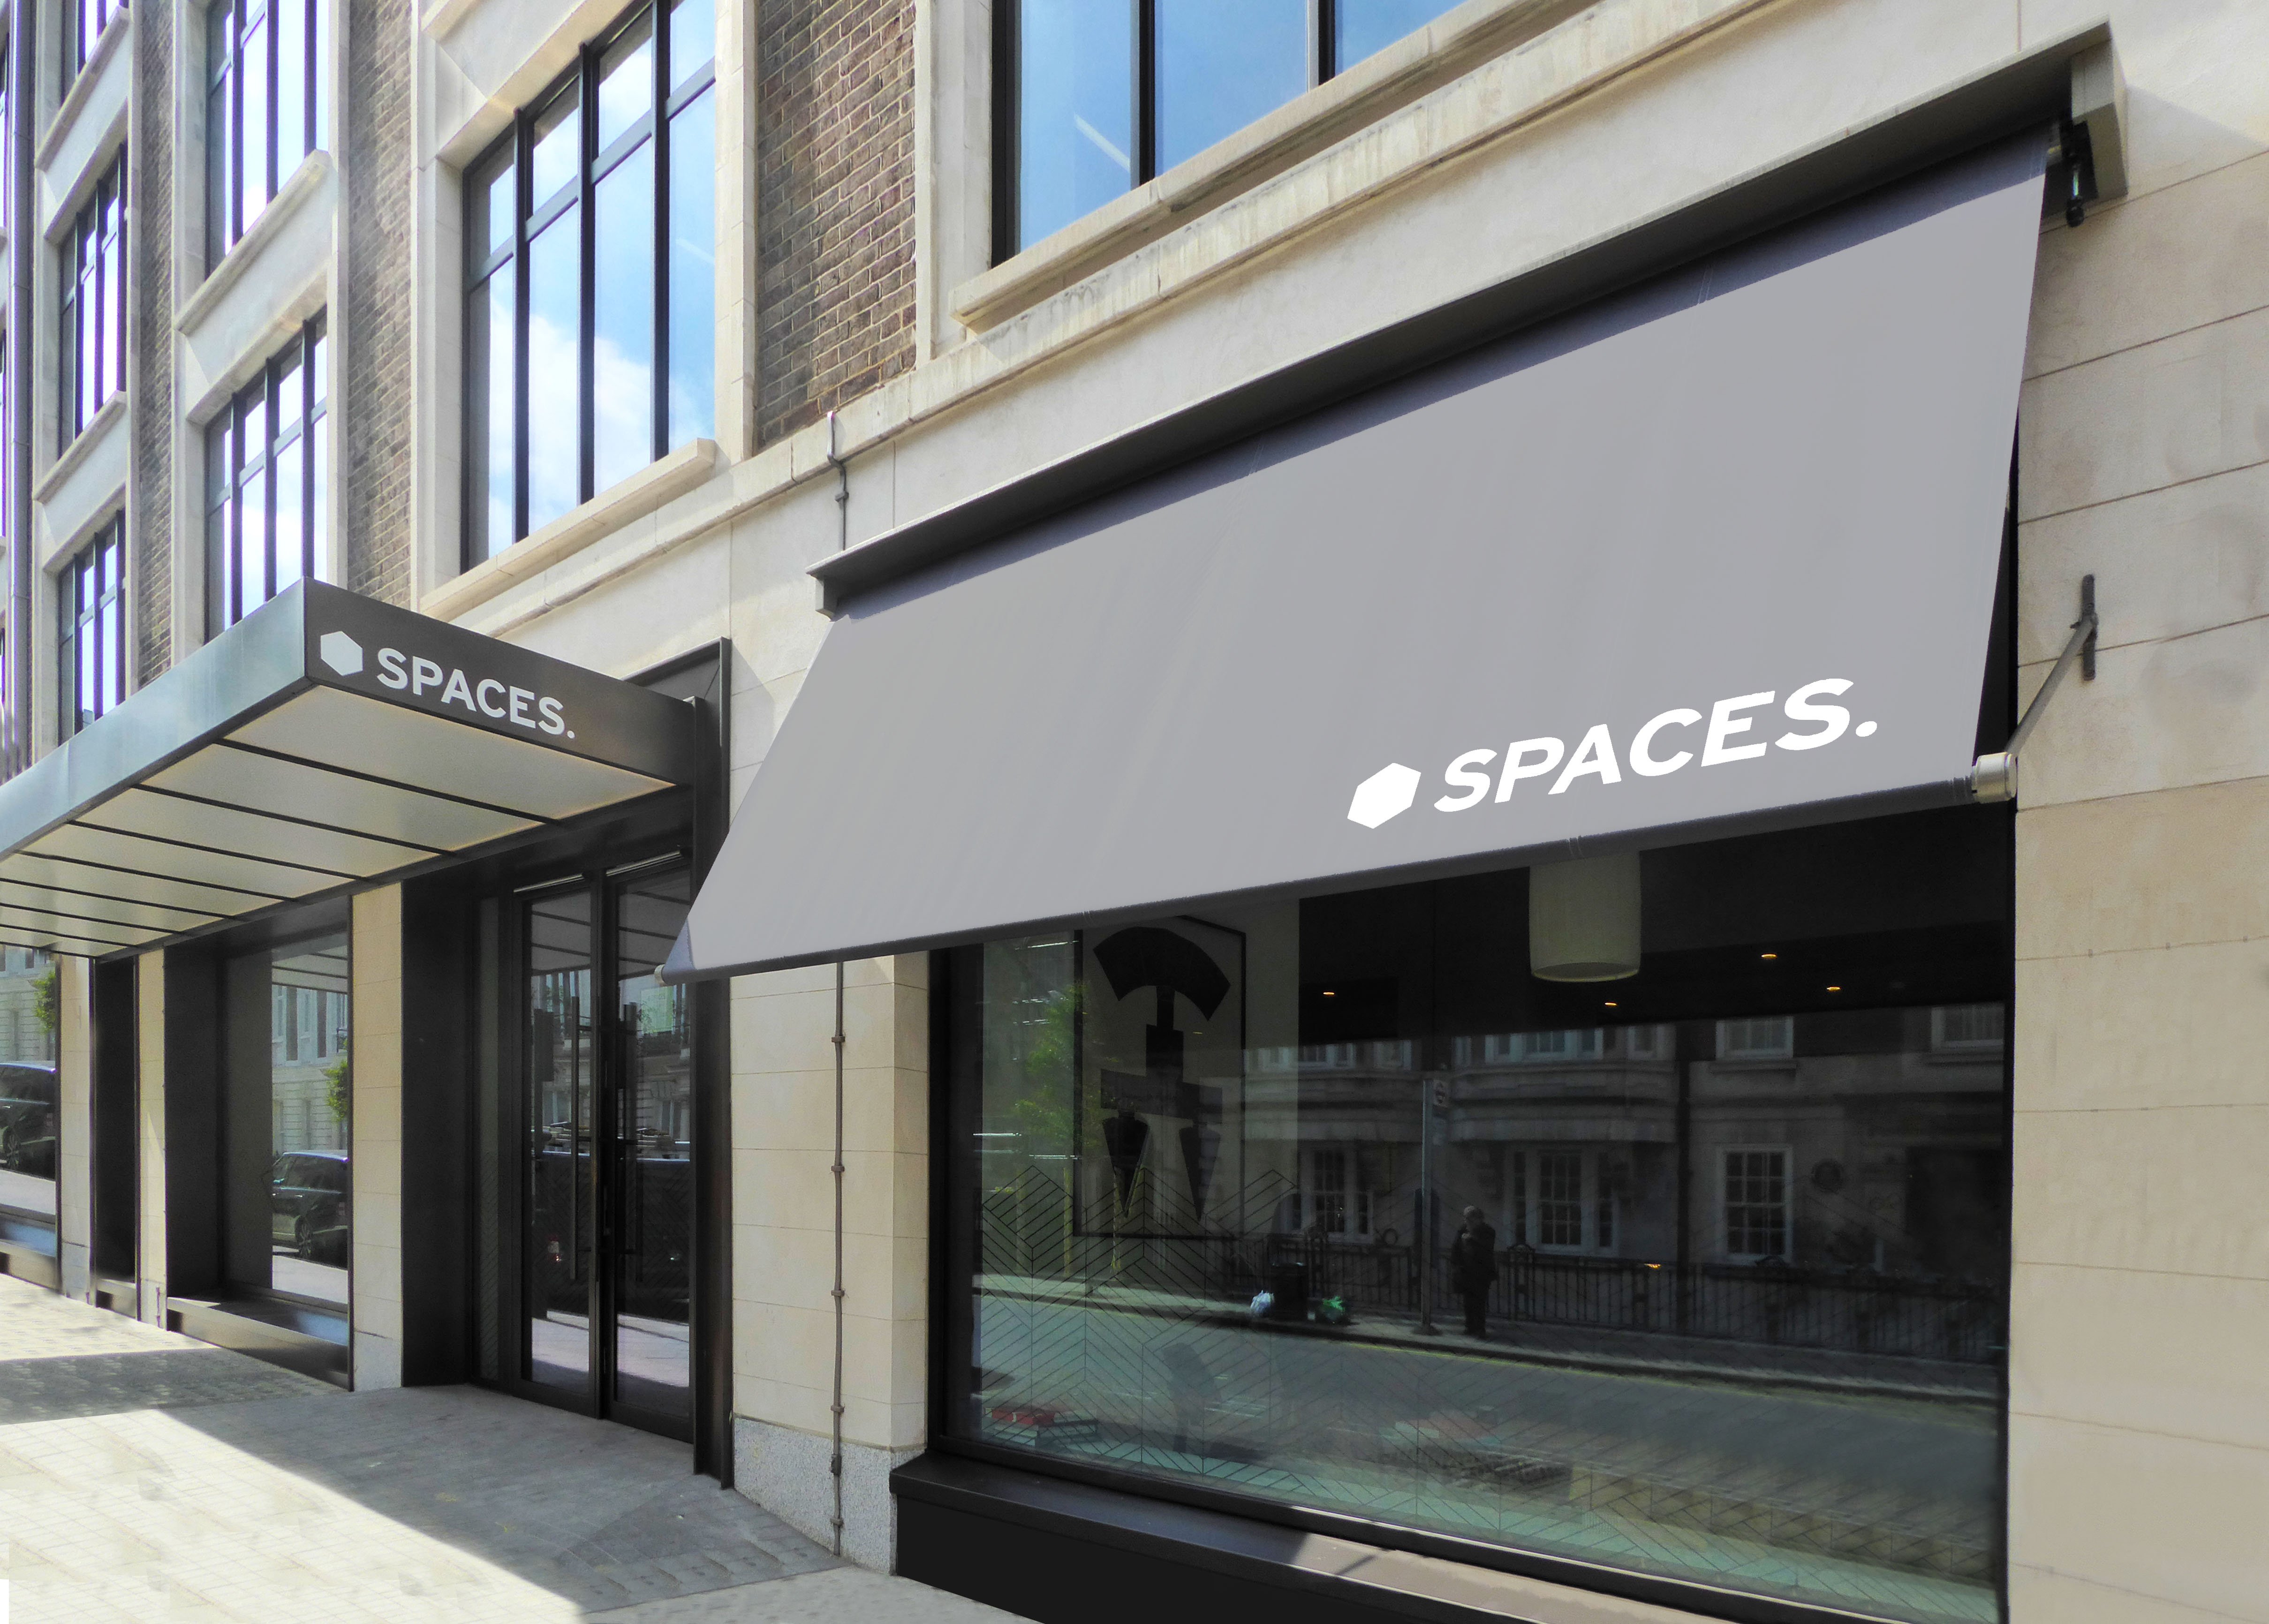 Greenwich awnings at Spaces